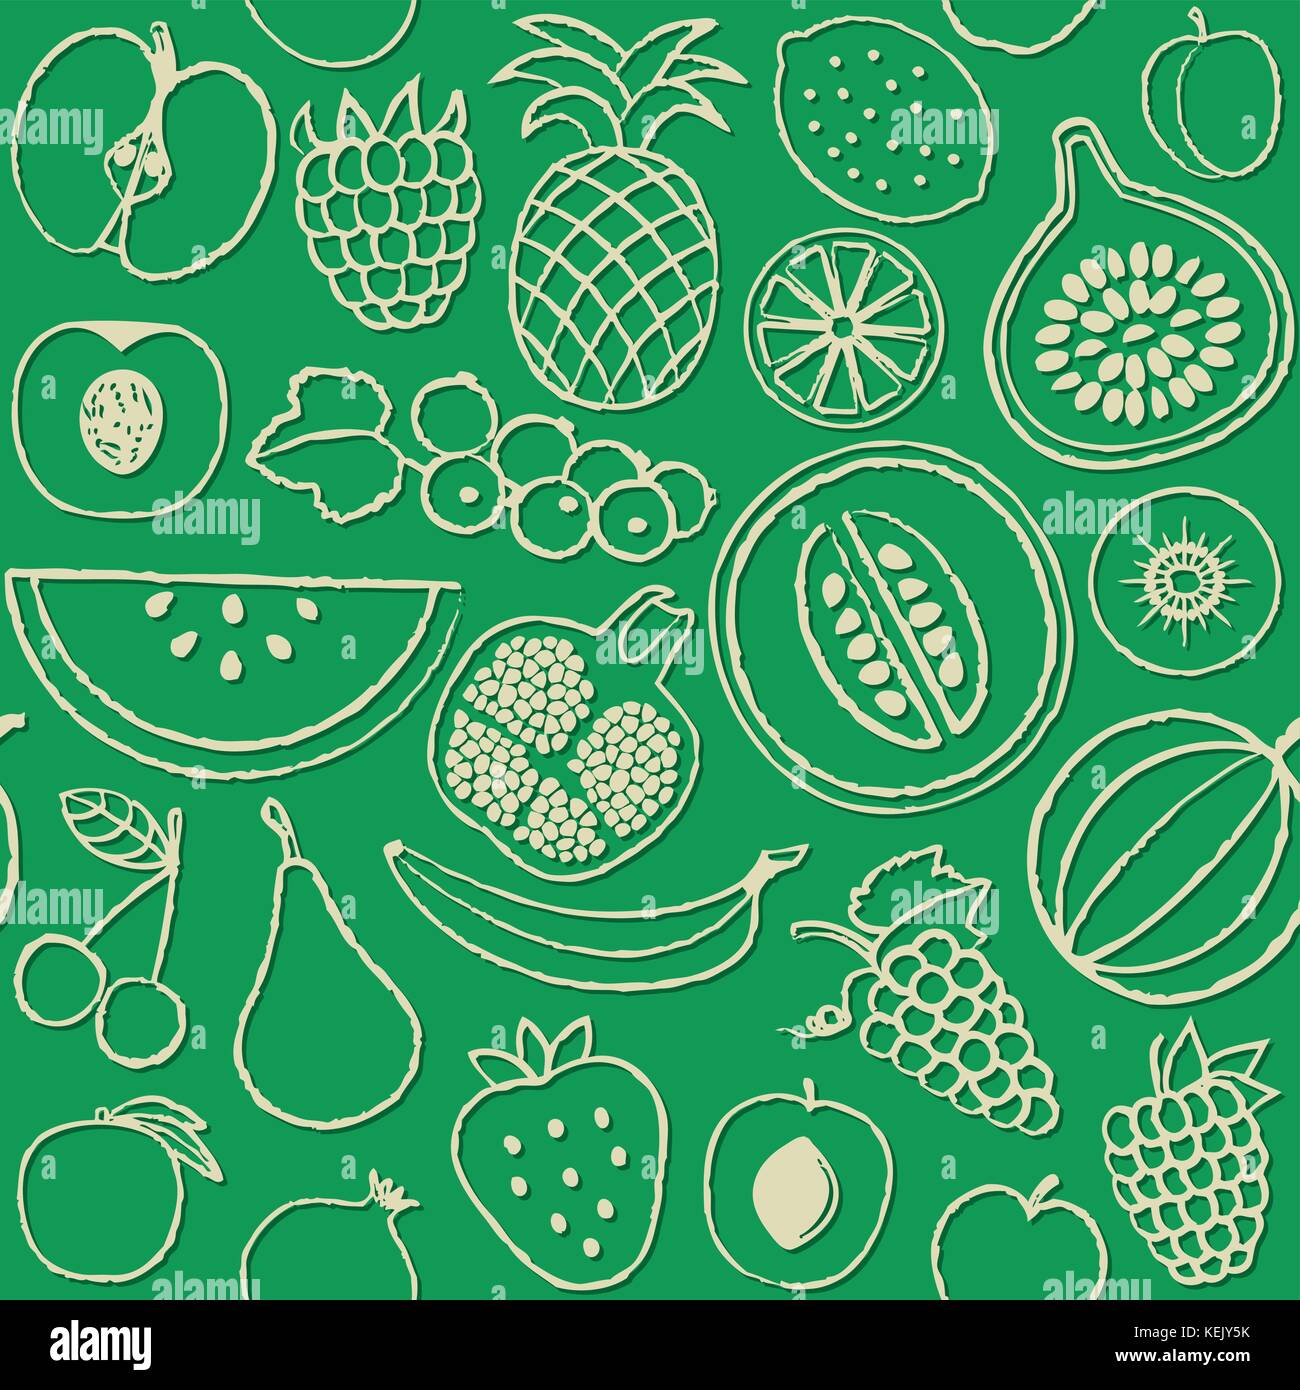 Vector seamless pattern with various fruits. Stock Vector